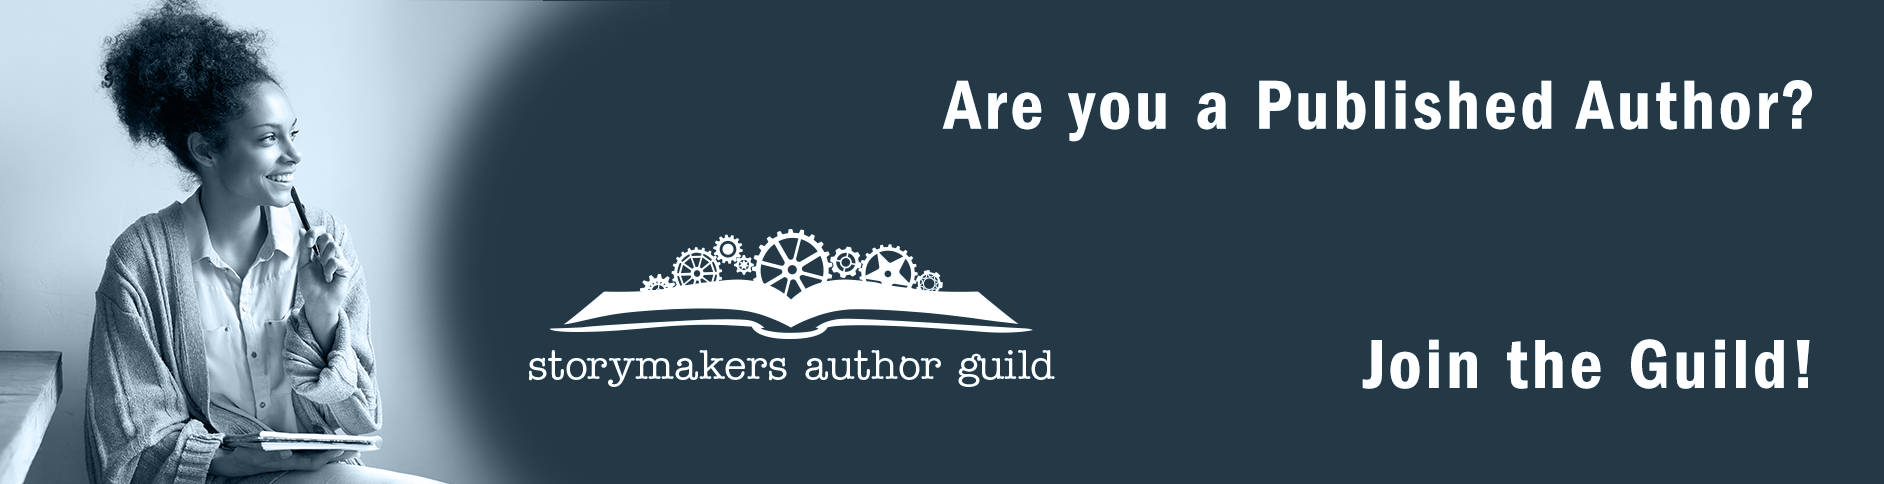 Are you a Published Author? Join the Guild!